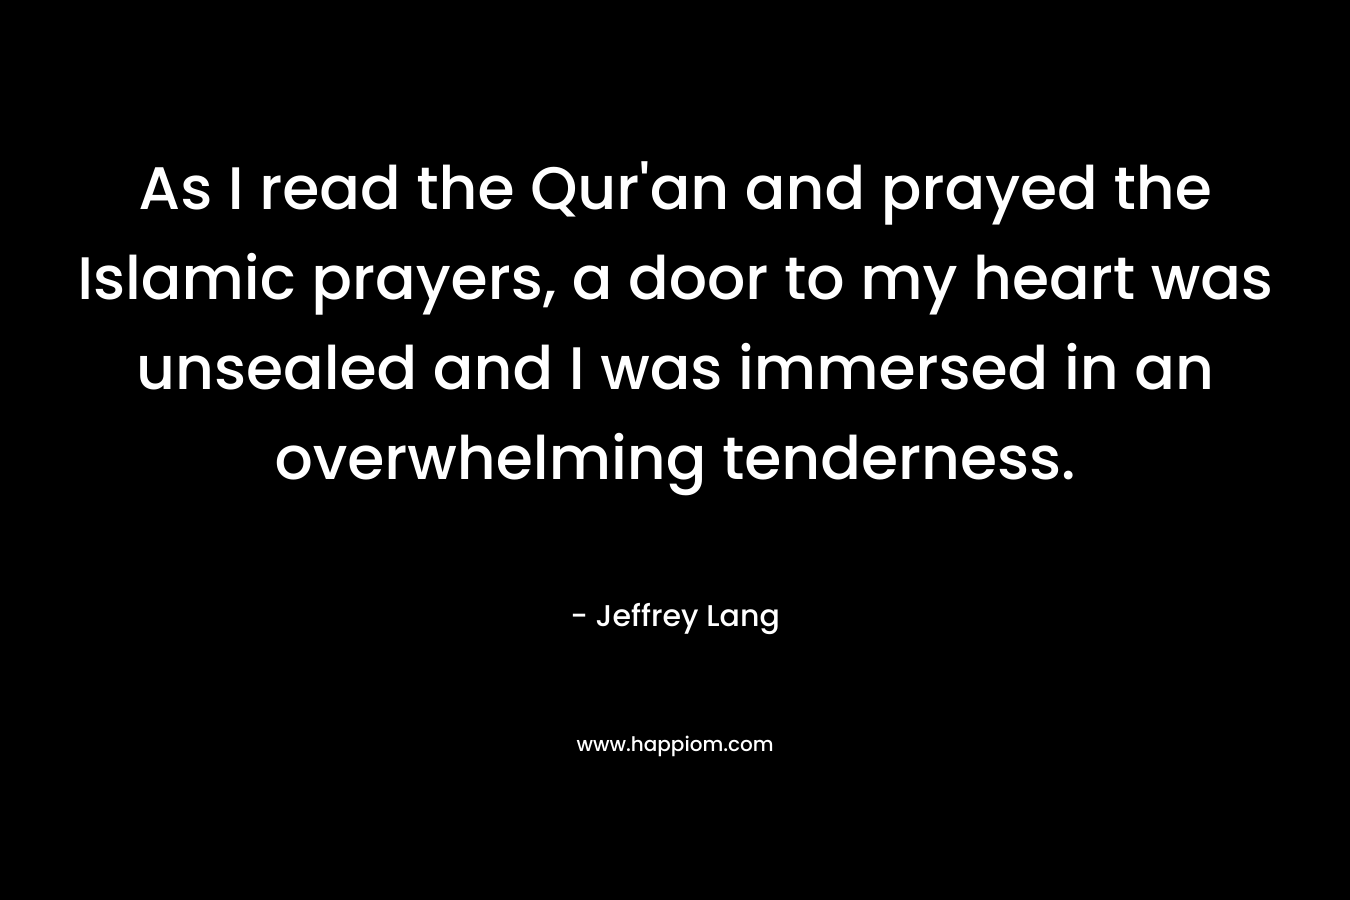 As I read the Qur’an and prayed the Islamic prayers, a door to my heart was unsealed and I was immersed in an overwhelming tenderness. – Jeffrey Lang